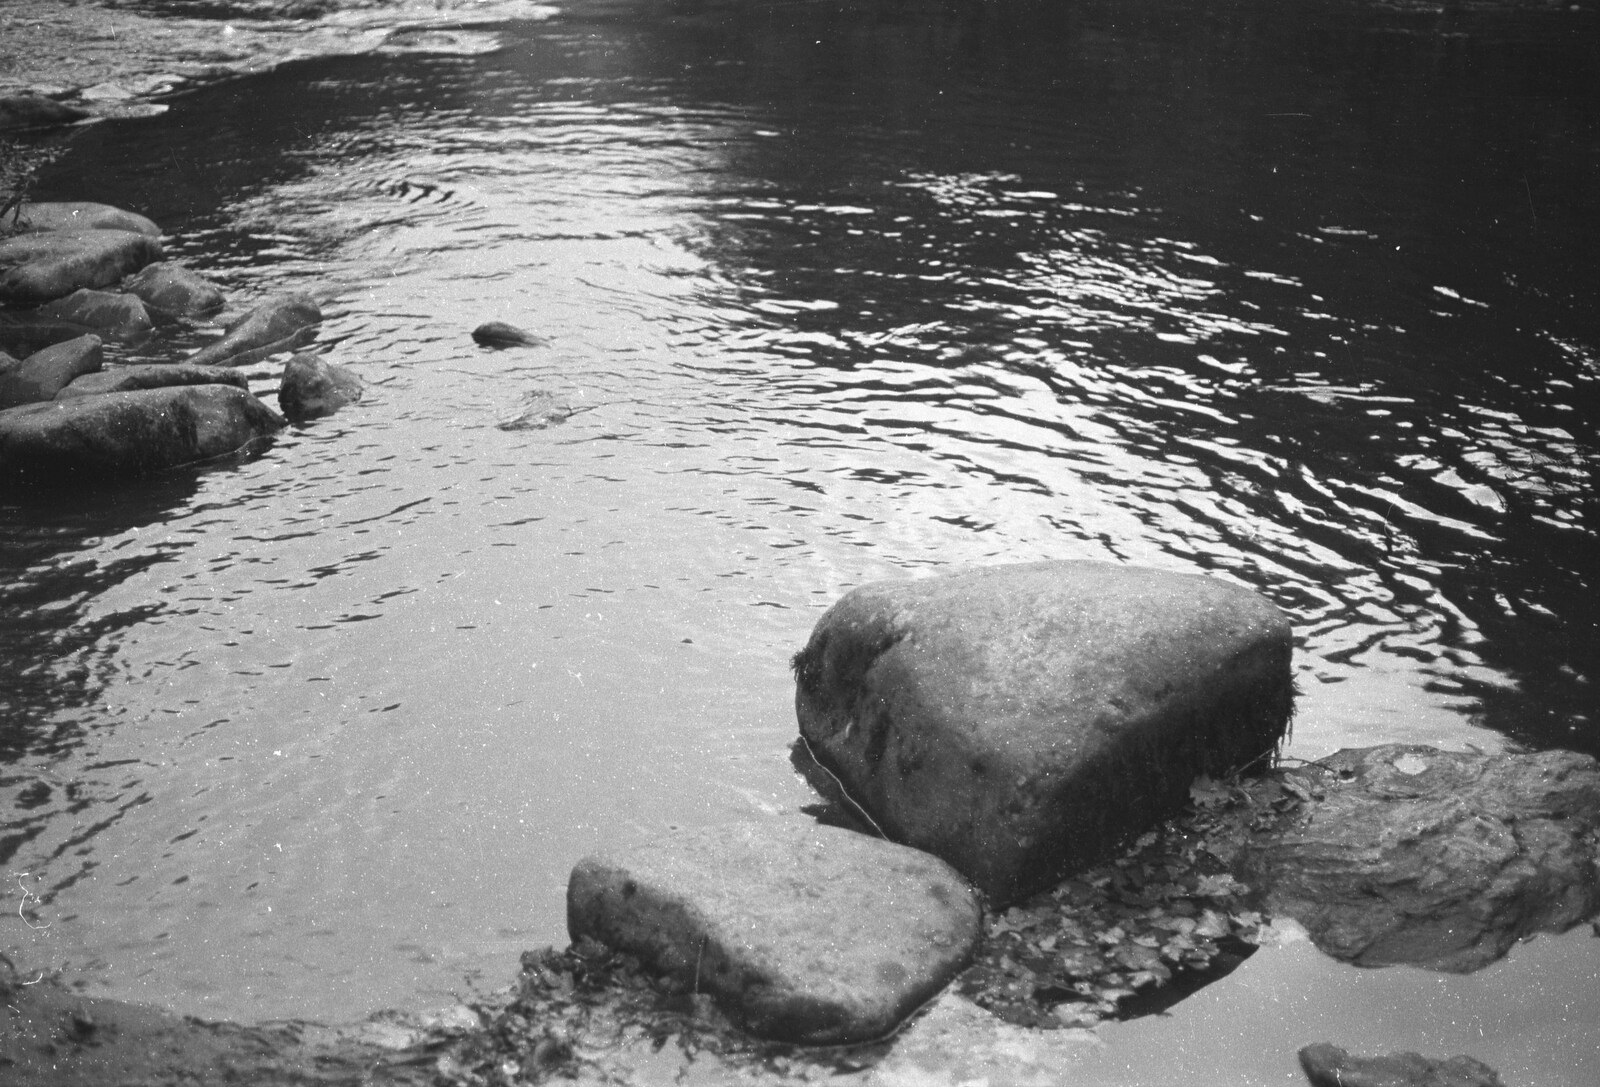 London Party and a Trip to Mother's, Hoo Meavy, Devon - 5th August 1993: A rock pool